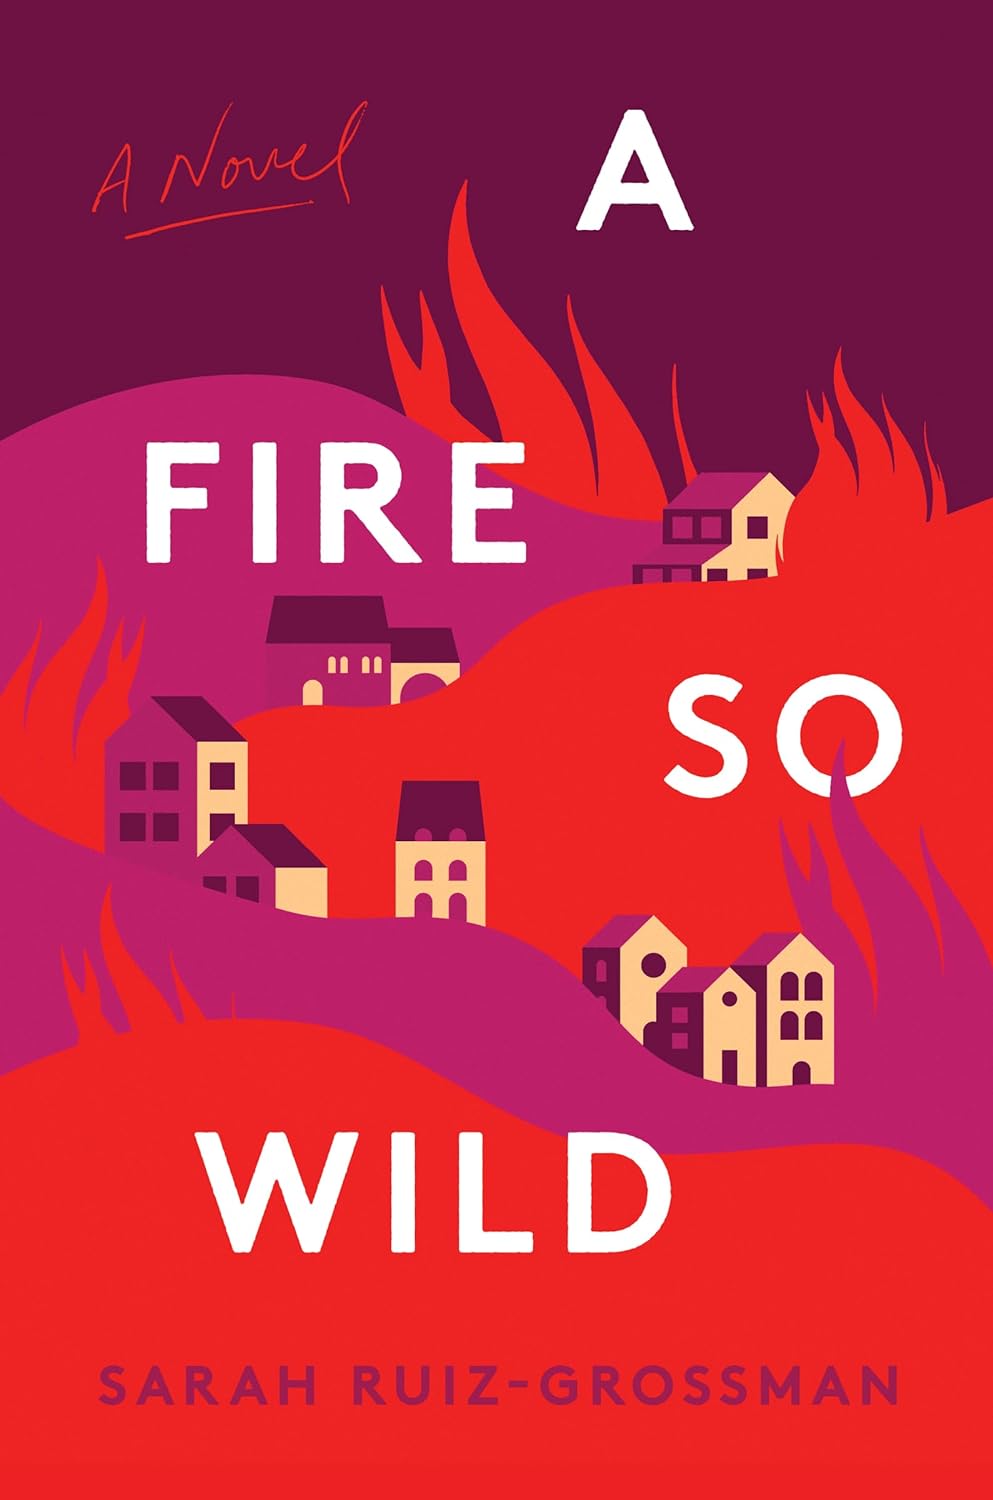 Image for "A Fire So Wild"